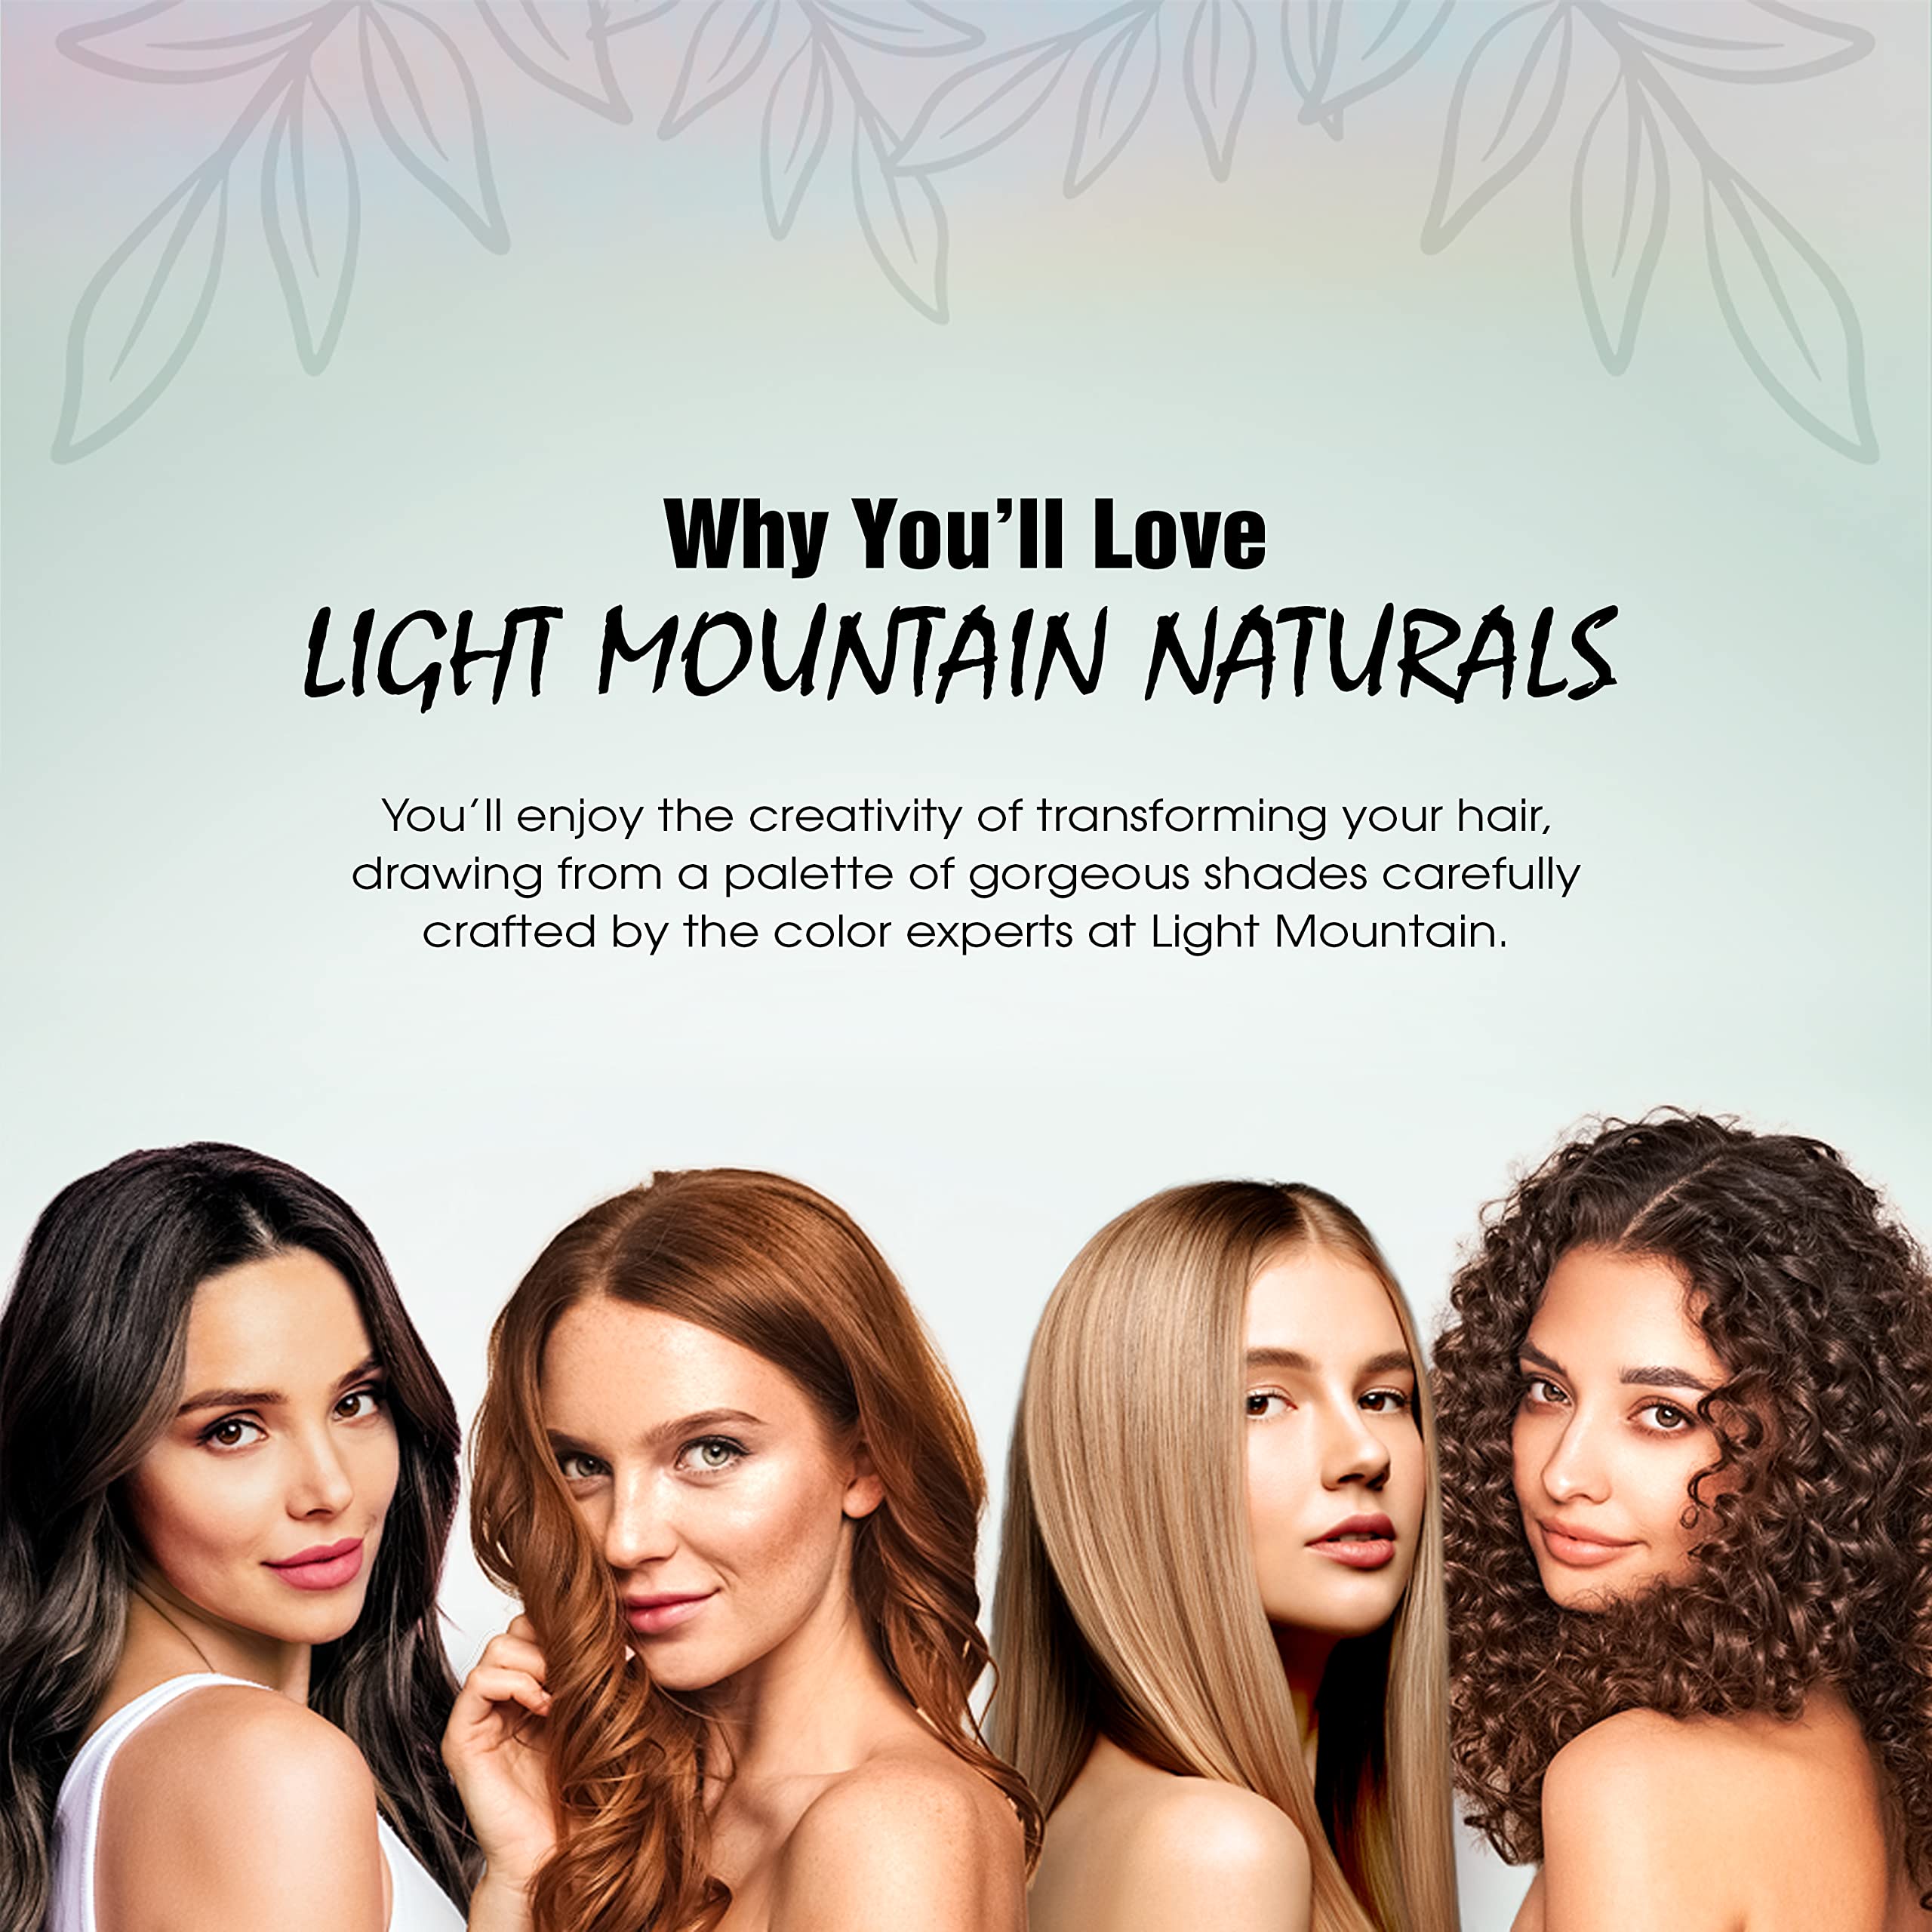 Light Mountain Henna Hair Color & Conditioner - Mahogany Hair Dye for Men/Women, Organic Henna Leaf Powder and Botanicals, Chemical-Free, Semi-Permanent Hair Color, 4 Oz